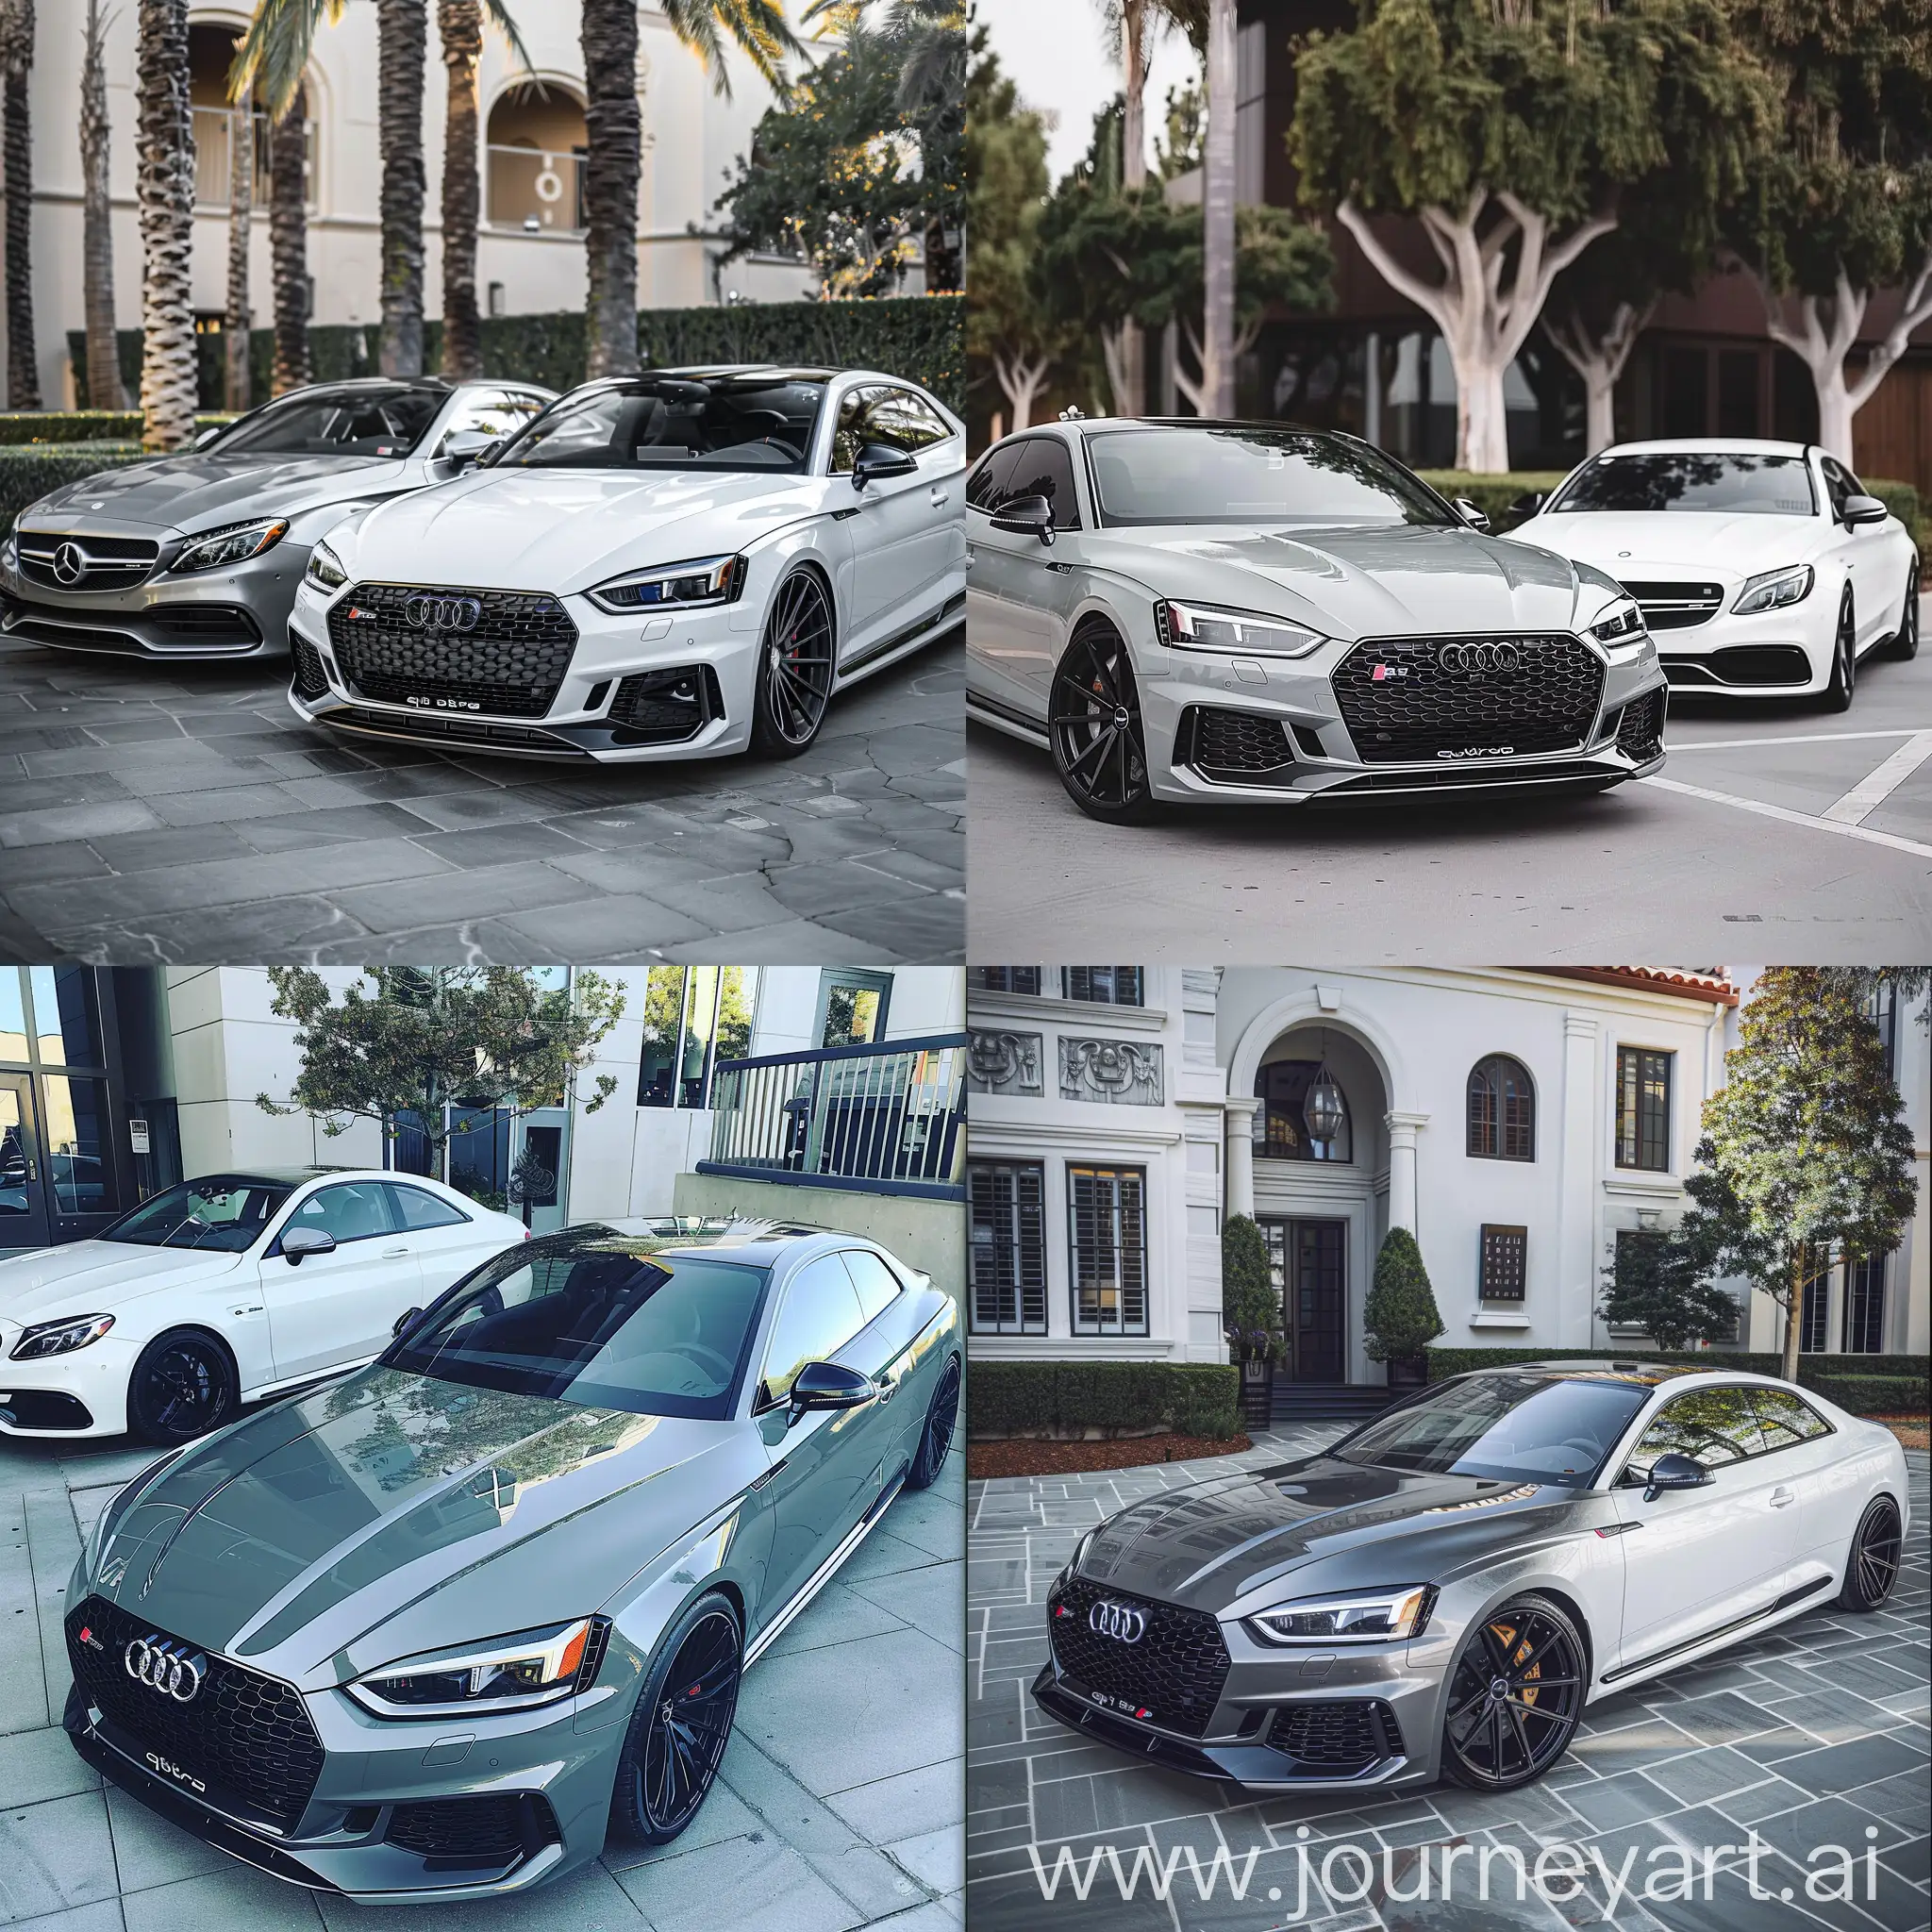 Audi-RS5-2018-and-Mercedes-C63-2018-Side-by-Side-Wallpaper-in-Instagram-Style